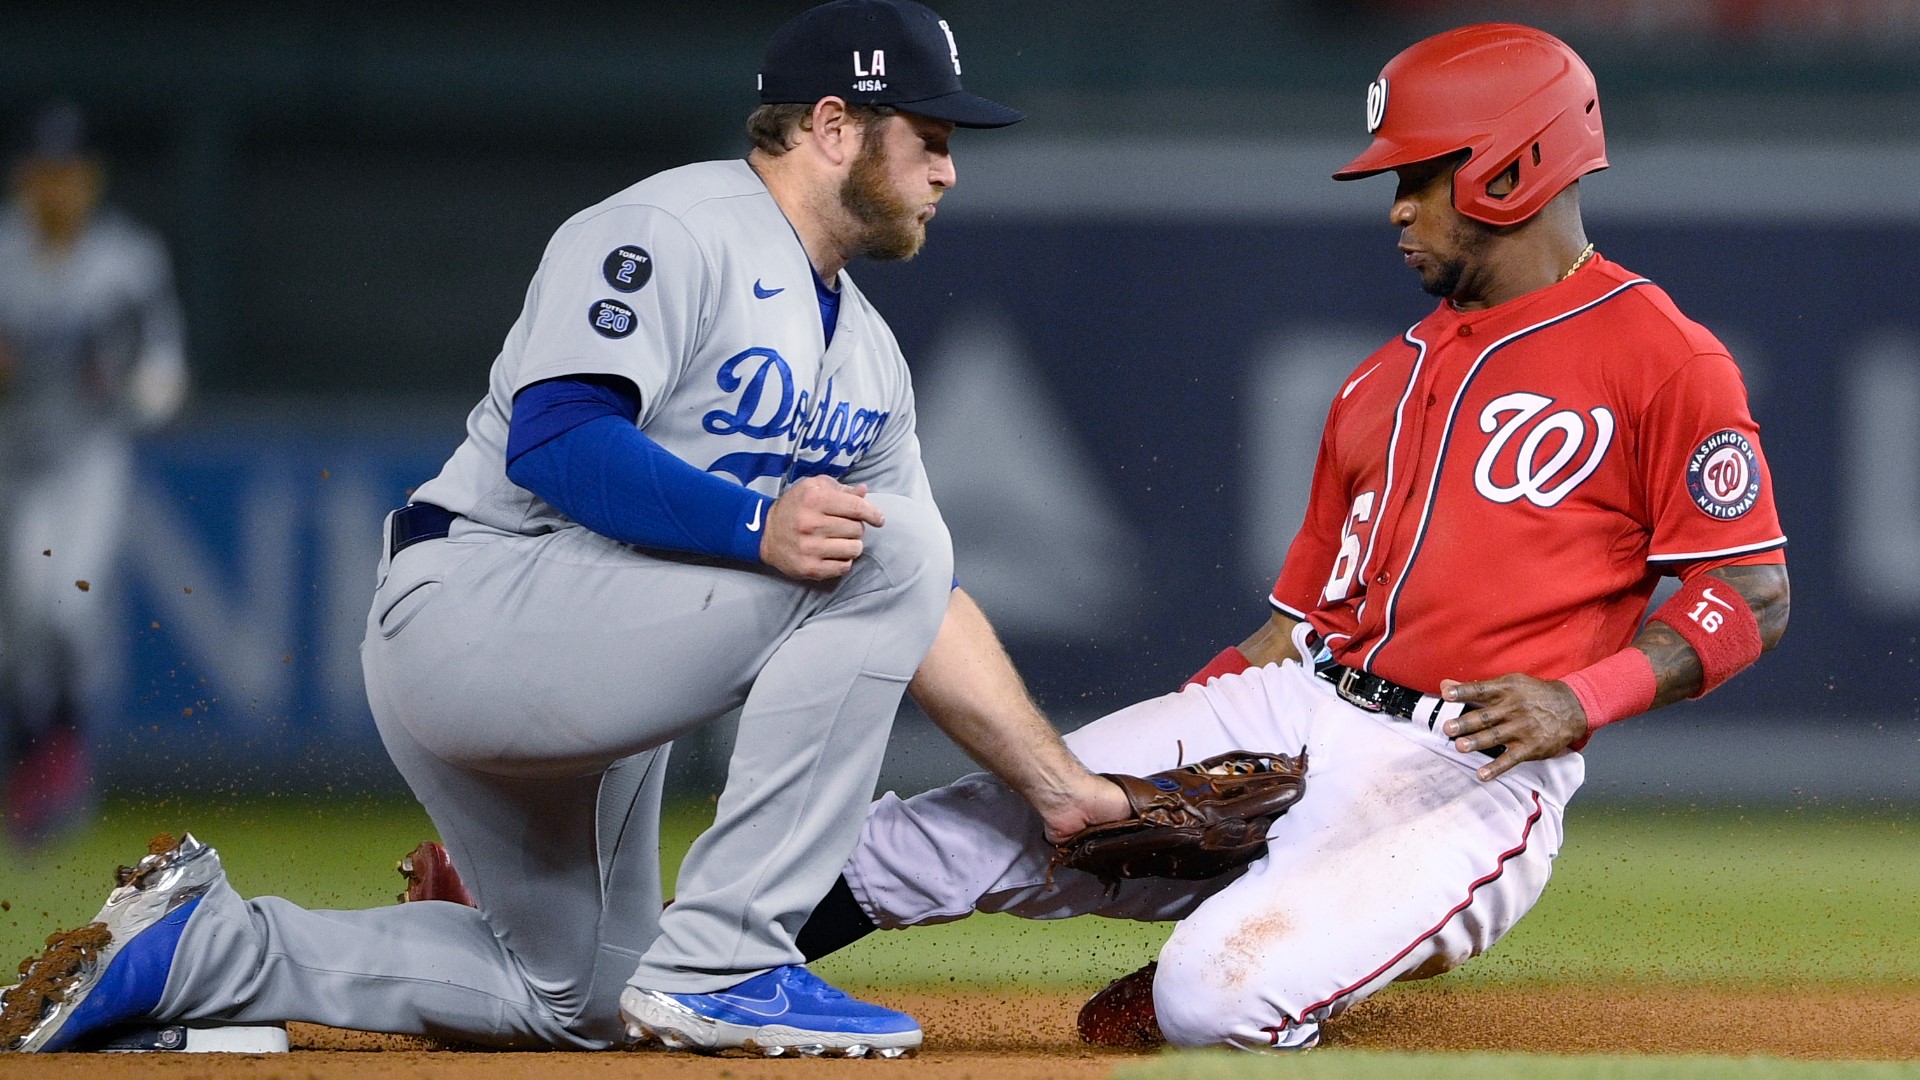 Josh Neighbors of the Locked On Nationals podcast breaks down Washington's series with Los Angeles after Dodgers completed a seven-game season sweep of the Nationals